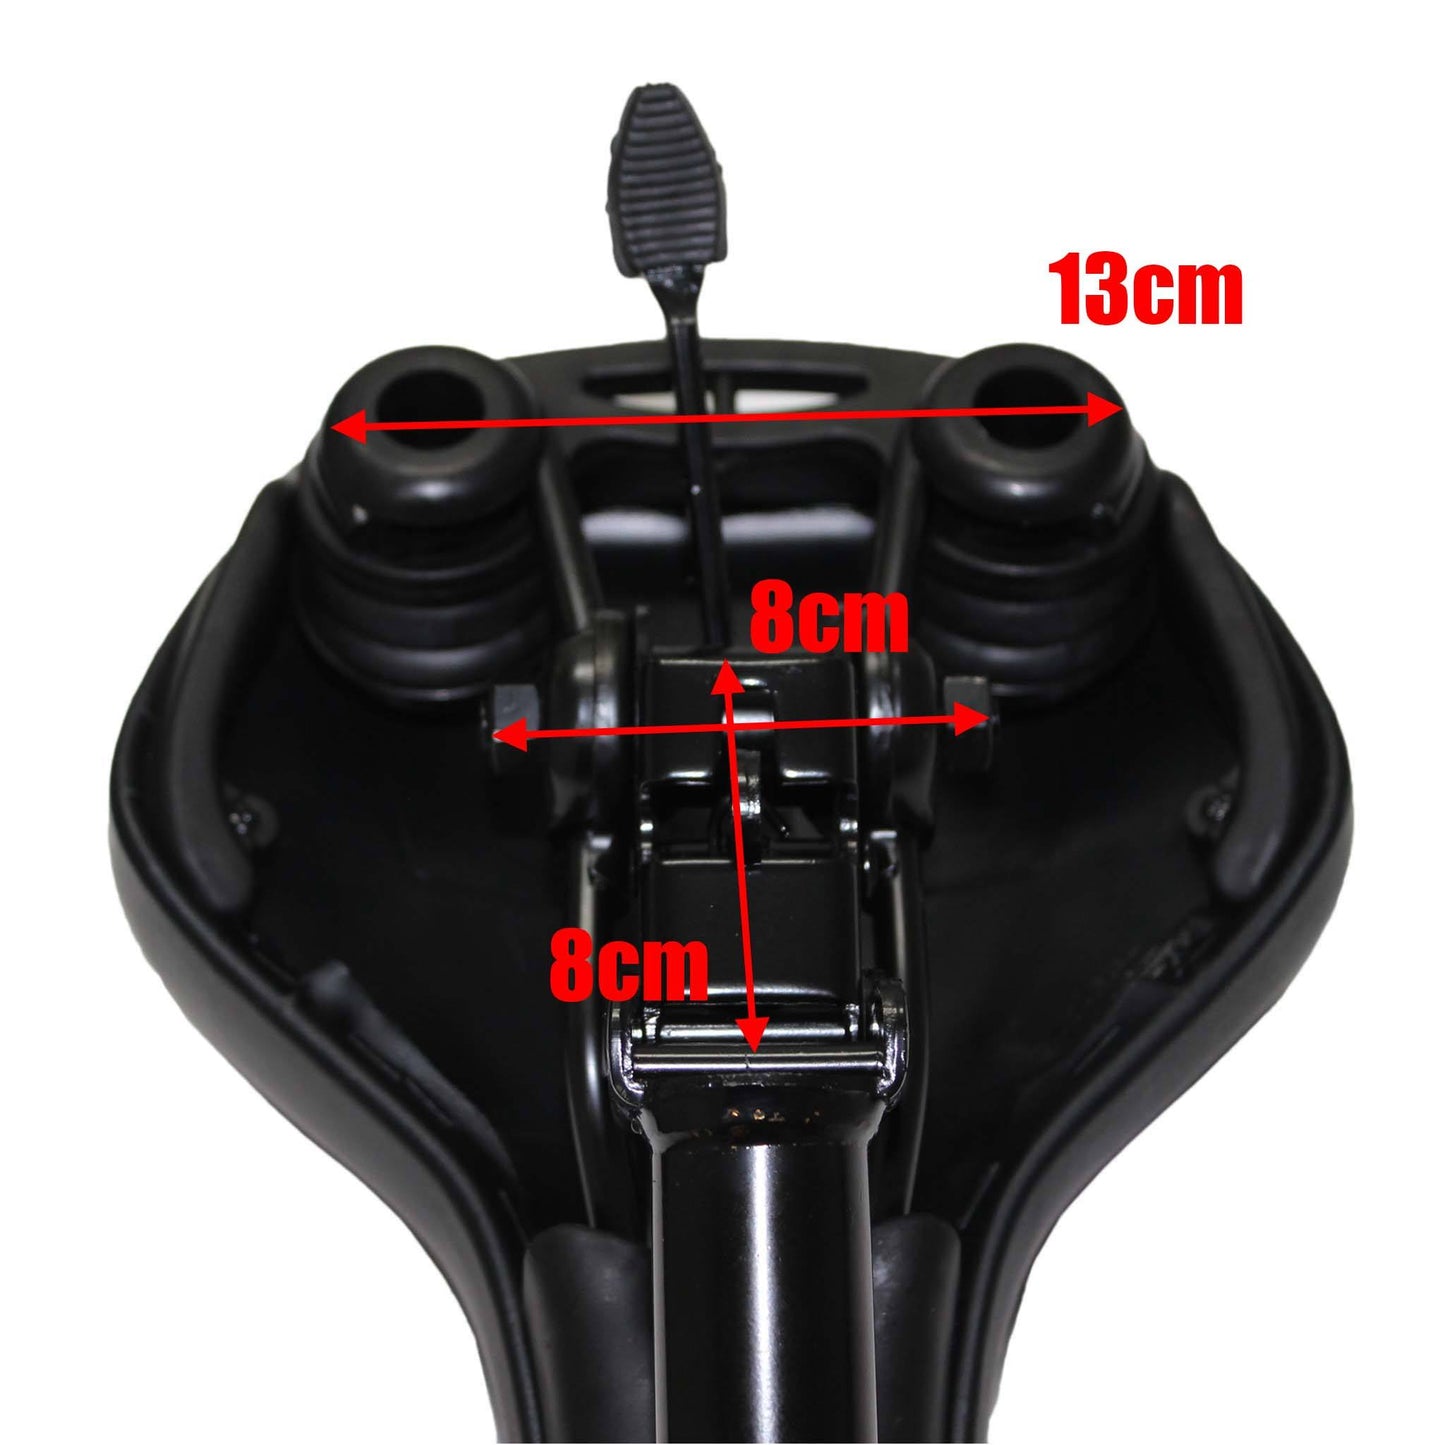 27mm Black Universal Fit Foldable Bicycle Seat For Best Comfort - TDRMOTO